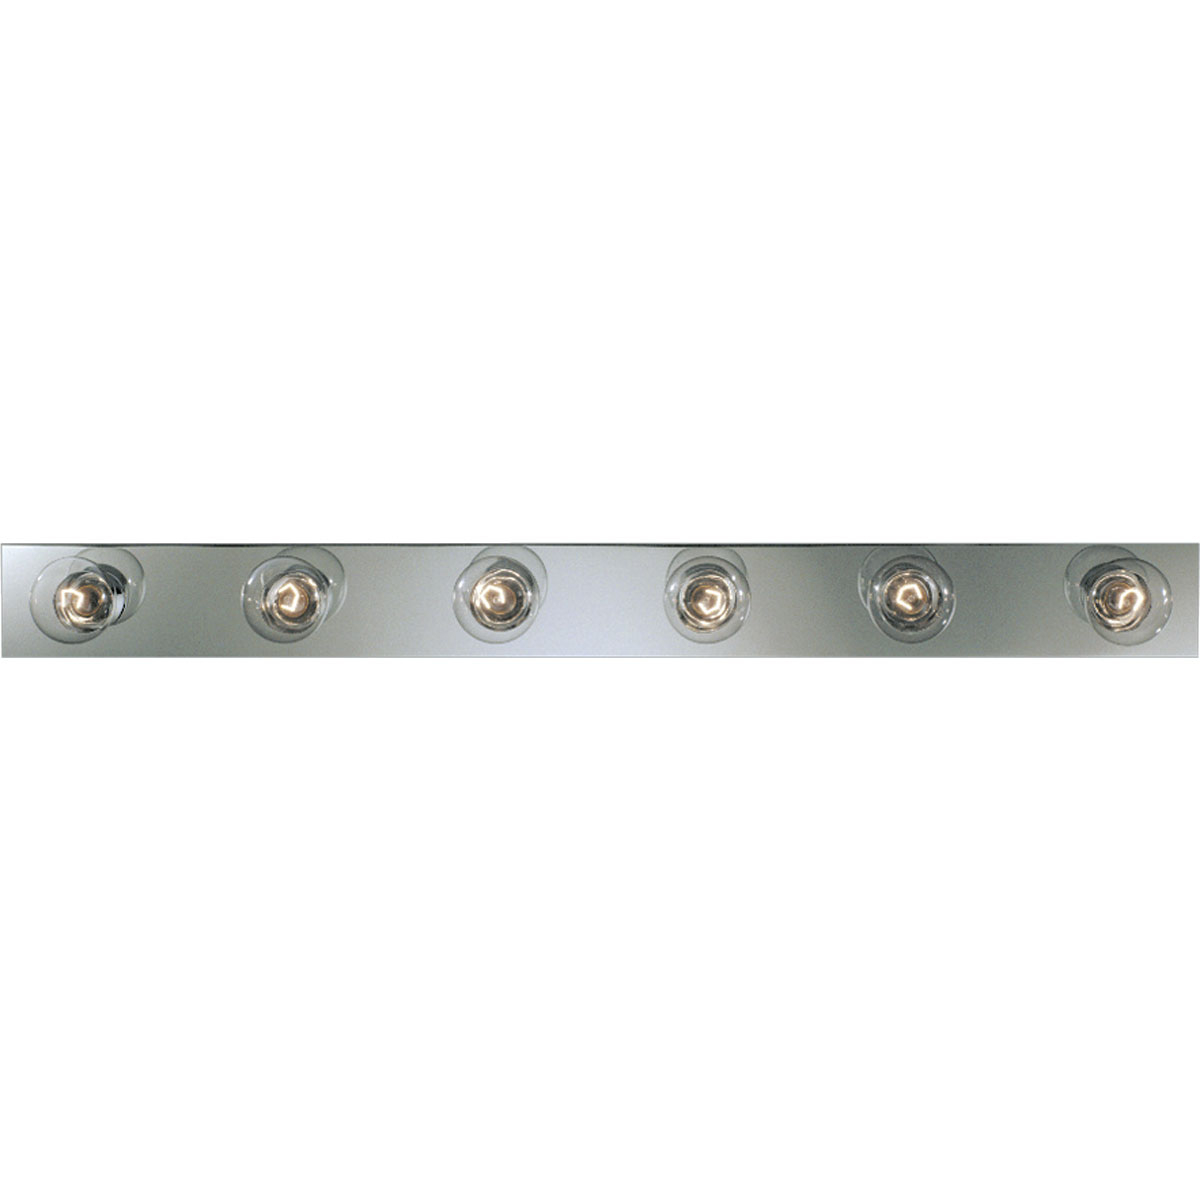 Basic Broadway Lighting strips use fewer lamps to lower the overall wattage per strip. This six-light bath strip with sockets on 7-1/2 inch centers gives an even spread of illumination. UL listed for ceiling mounting with 25w maximum lamps. Complete with a brilliant metallic finish.